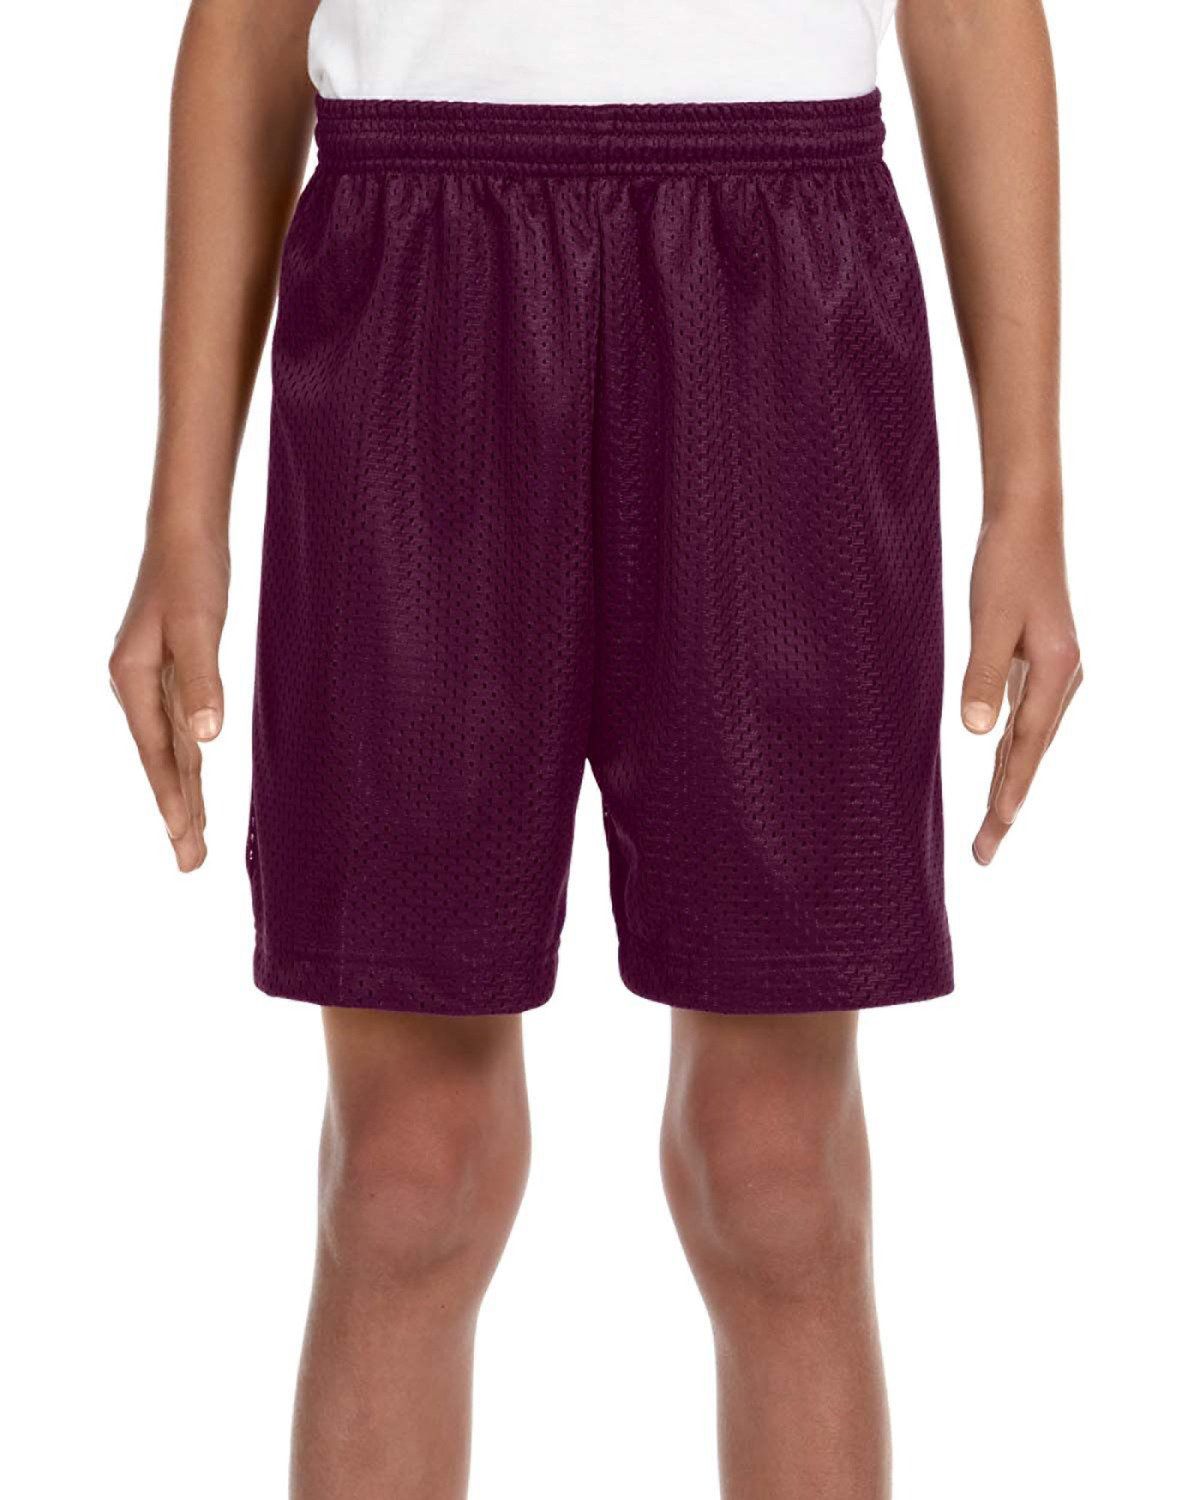 Buy A4 NB5301 Youth 6-Inch Lined Tricot Mesh Shorts - Apparelnbags.com